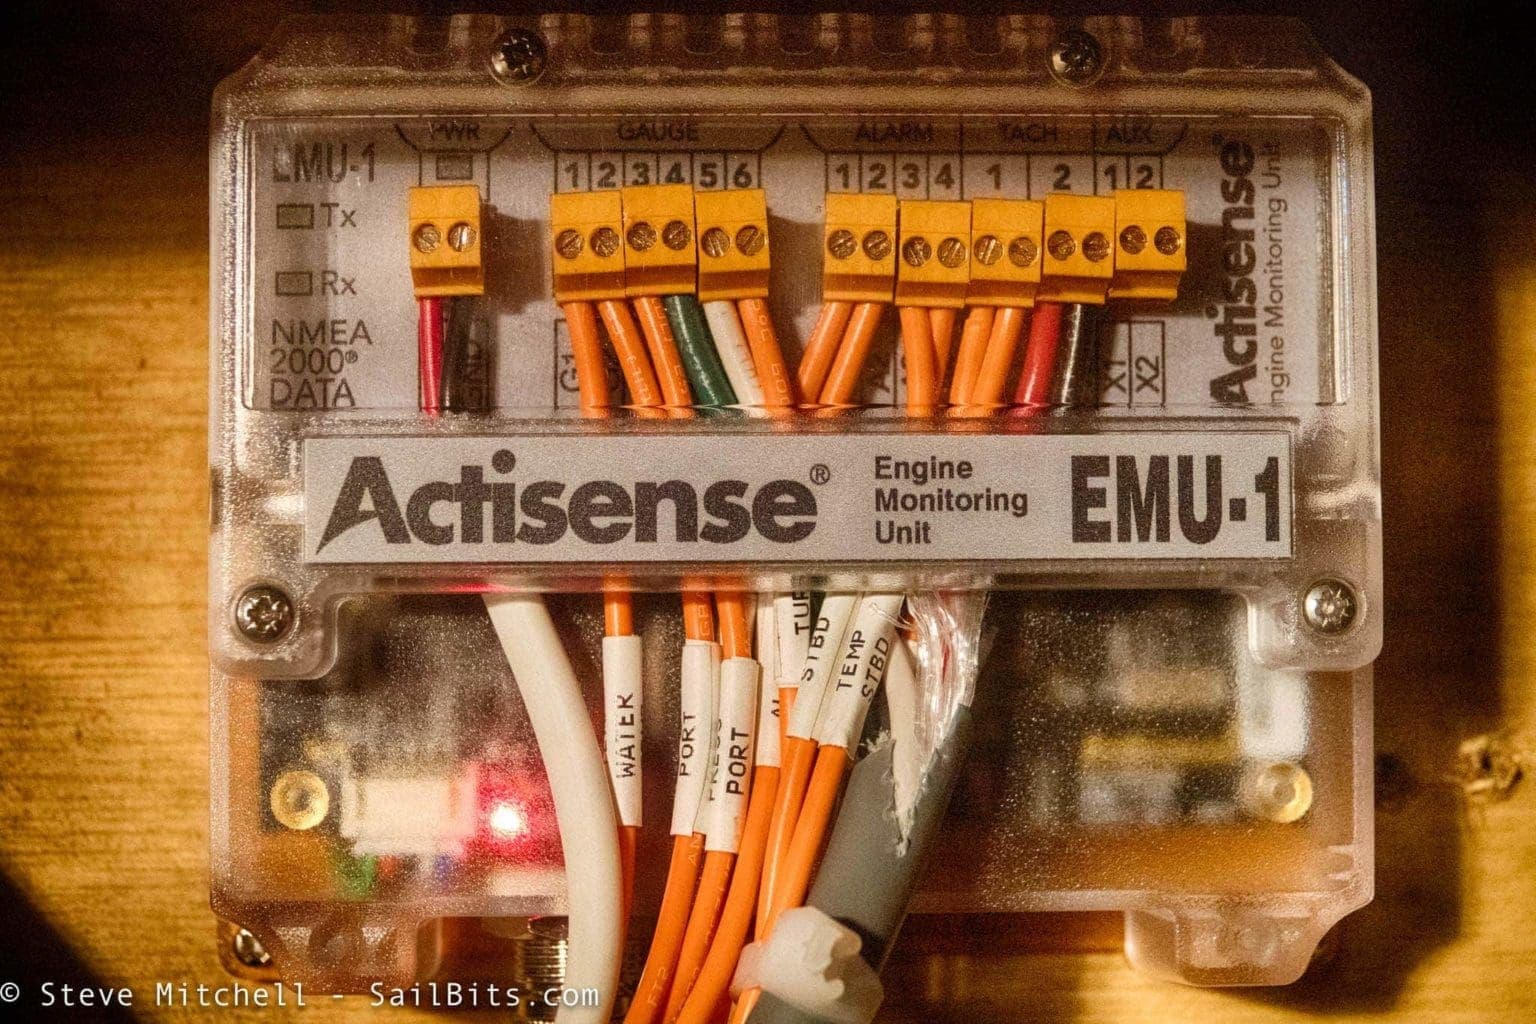 Monitor your engine with the Actisense EMU-1